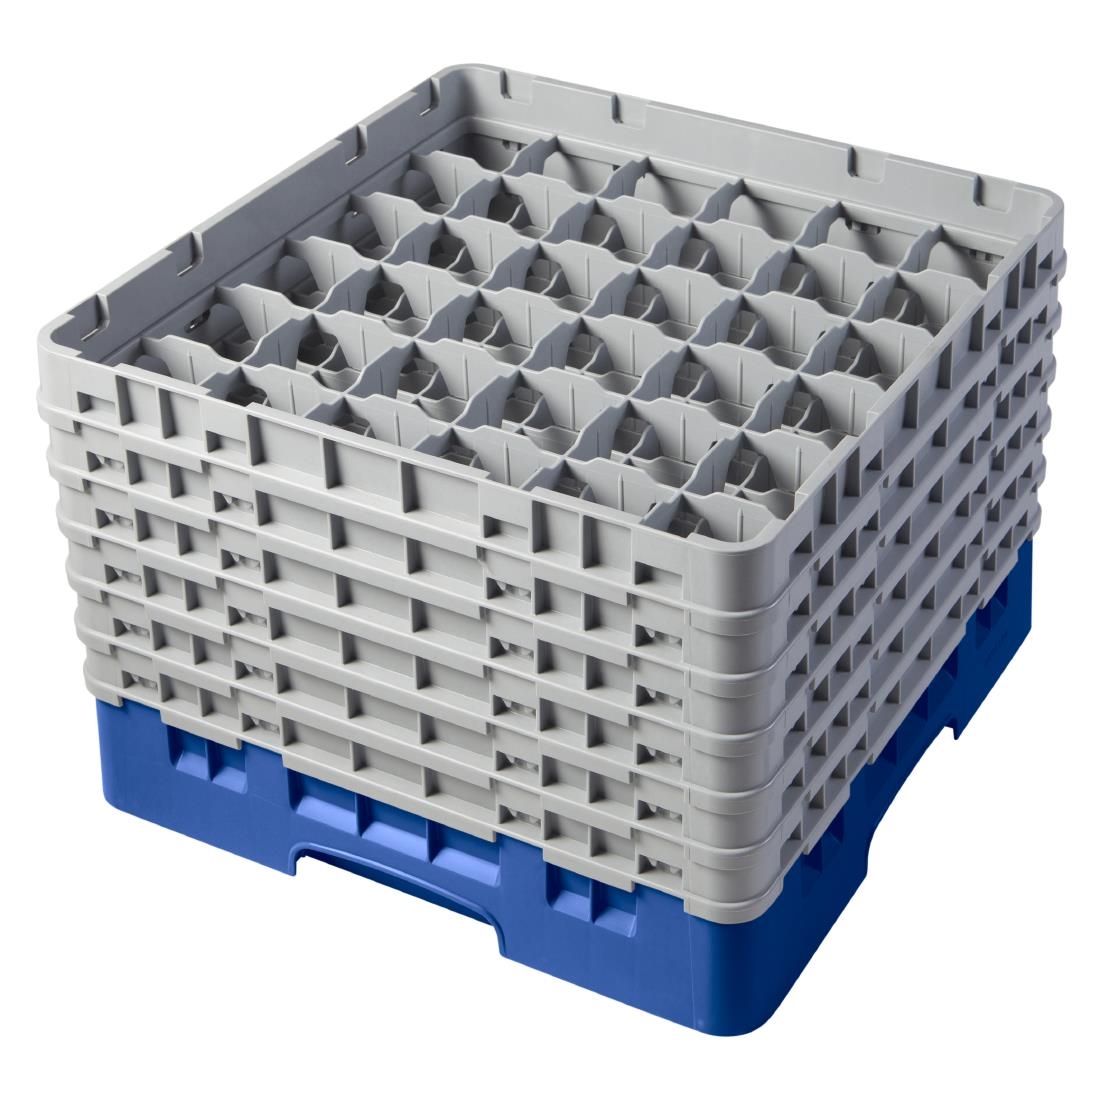 Cambro Camrack Blue 36 Compartments Max Glass Height 298mm